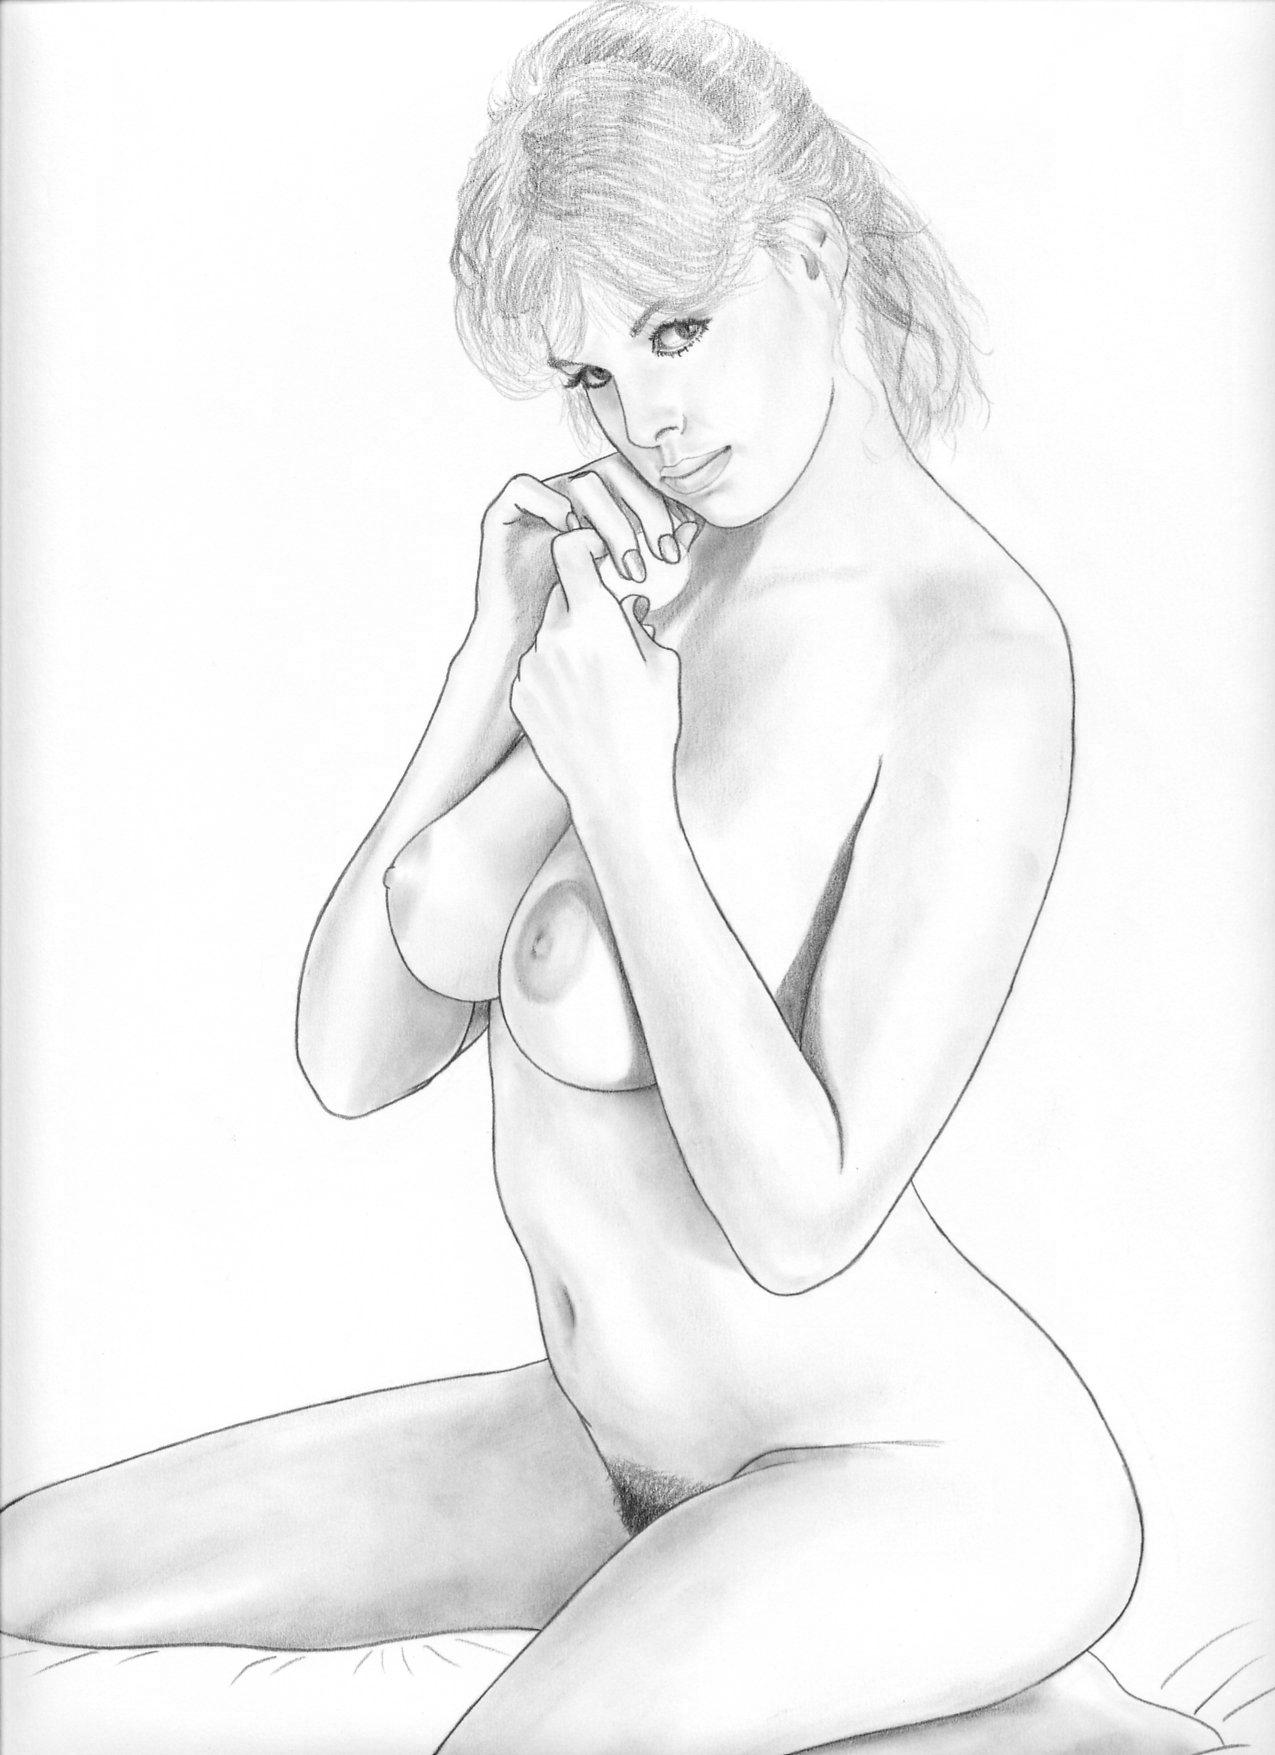 Cake recommendet drawing a nude blond lady